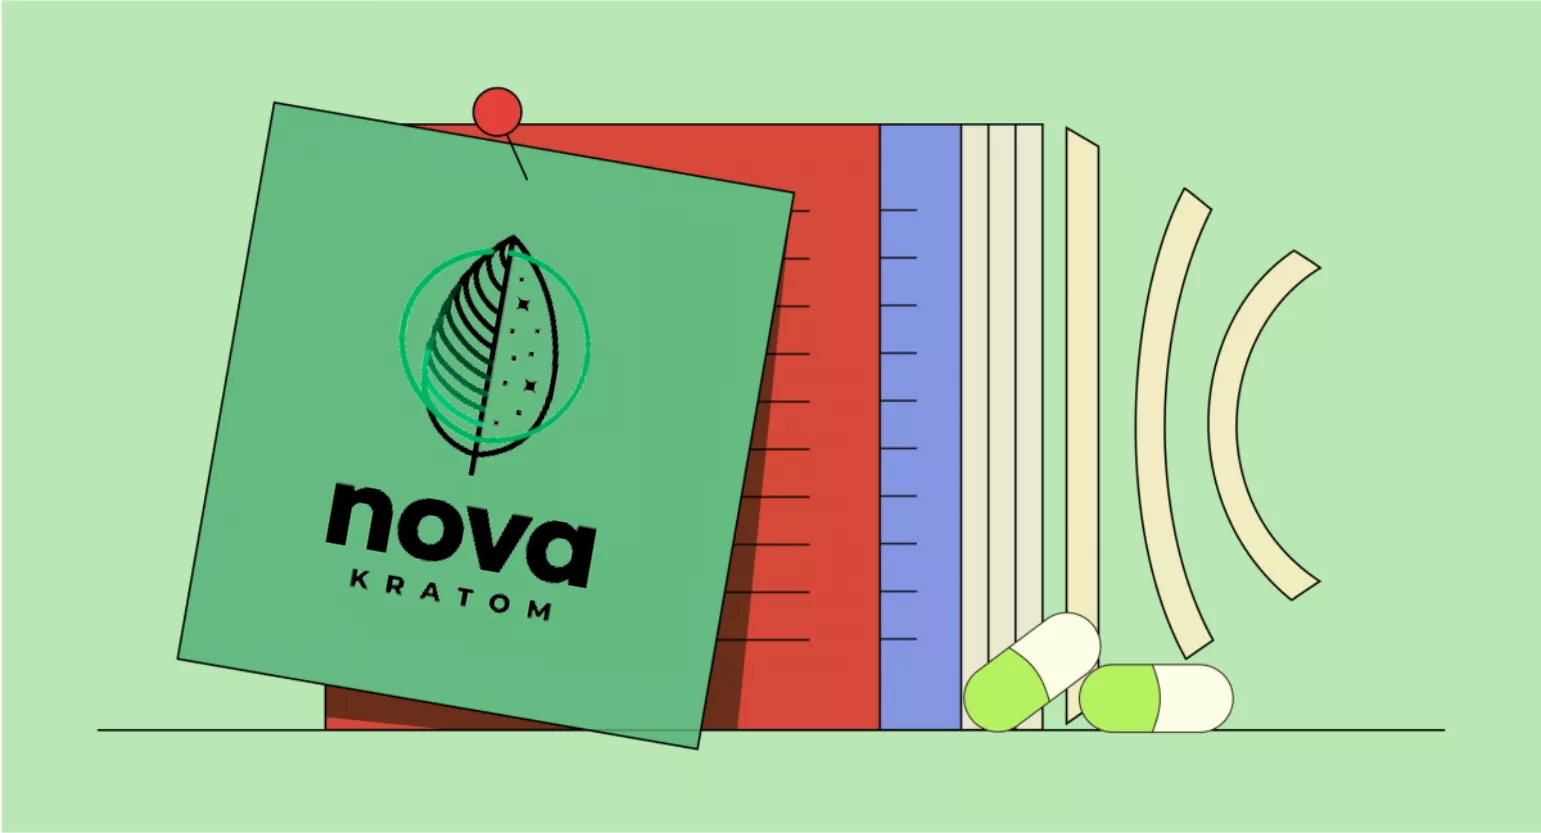 Nova Kratom Review: A Promising New Brand With Great Potential